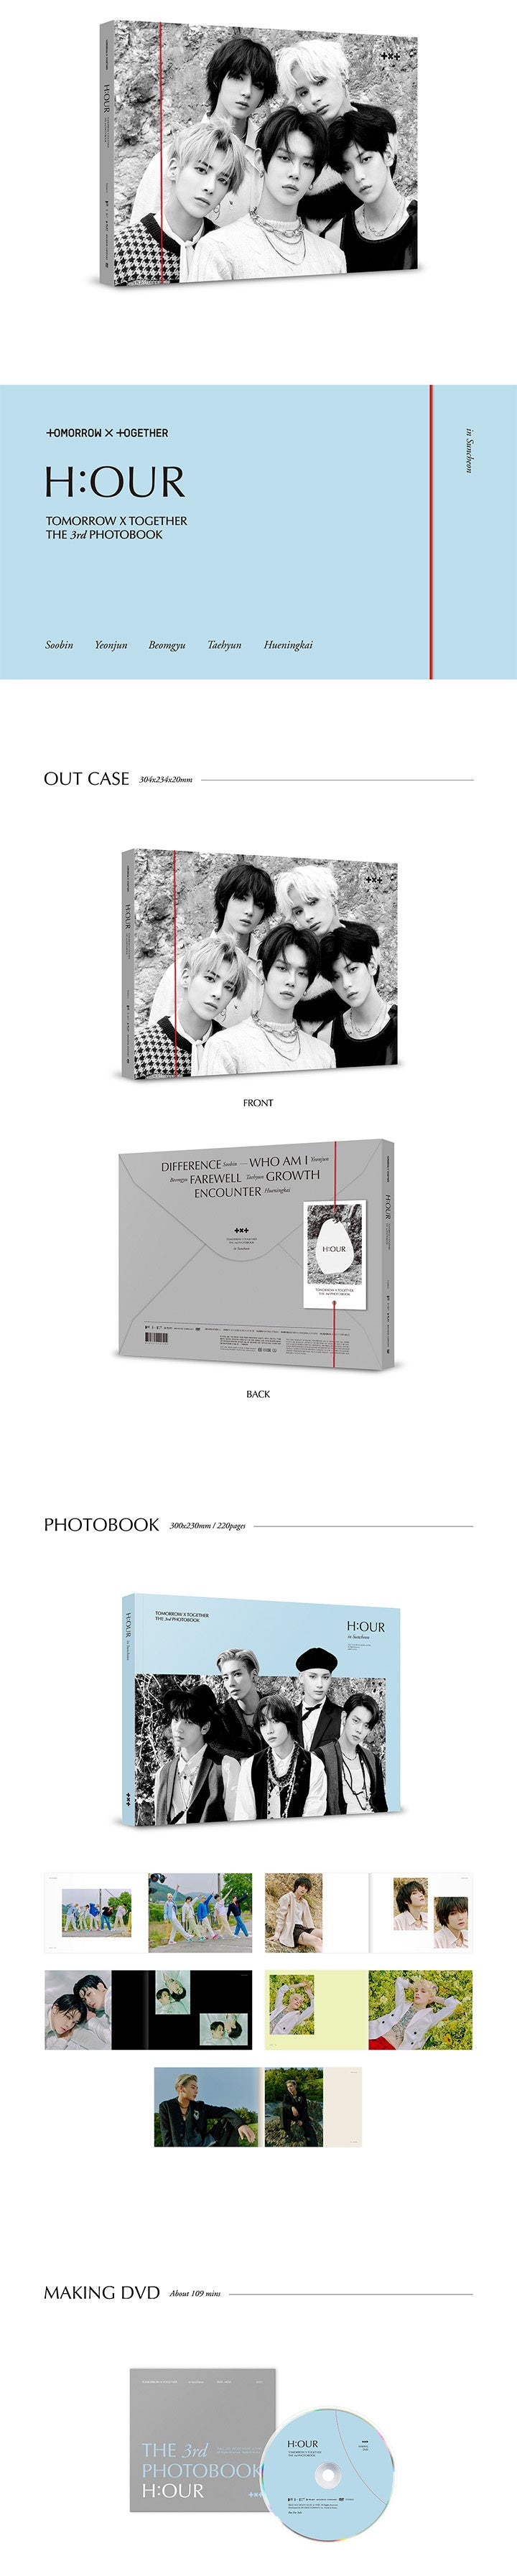 TXT - H:OUR in Suncheon & H:OUR+ SET [3rd Photobook + Extended 